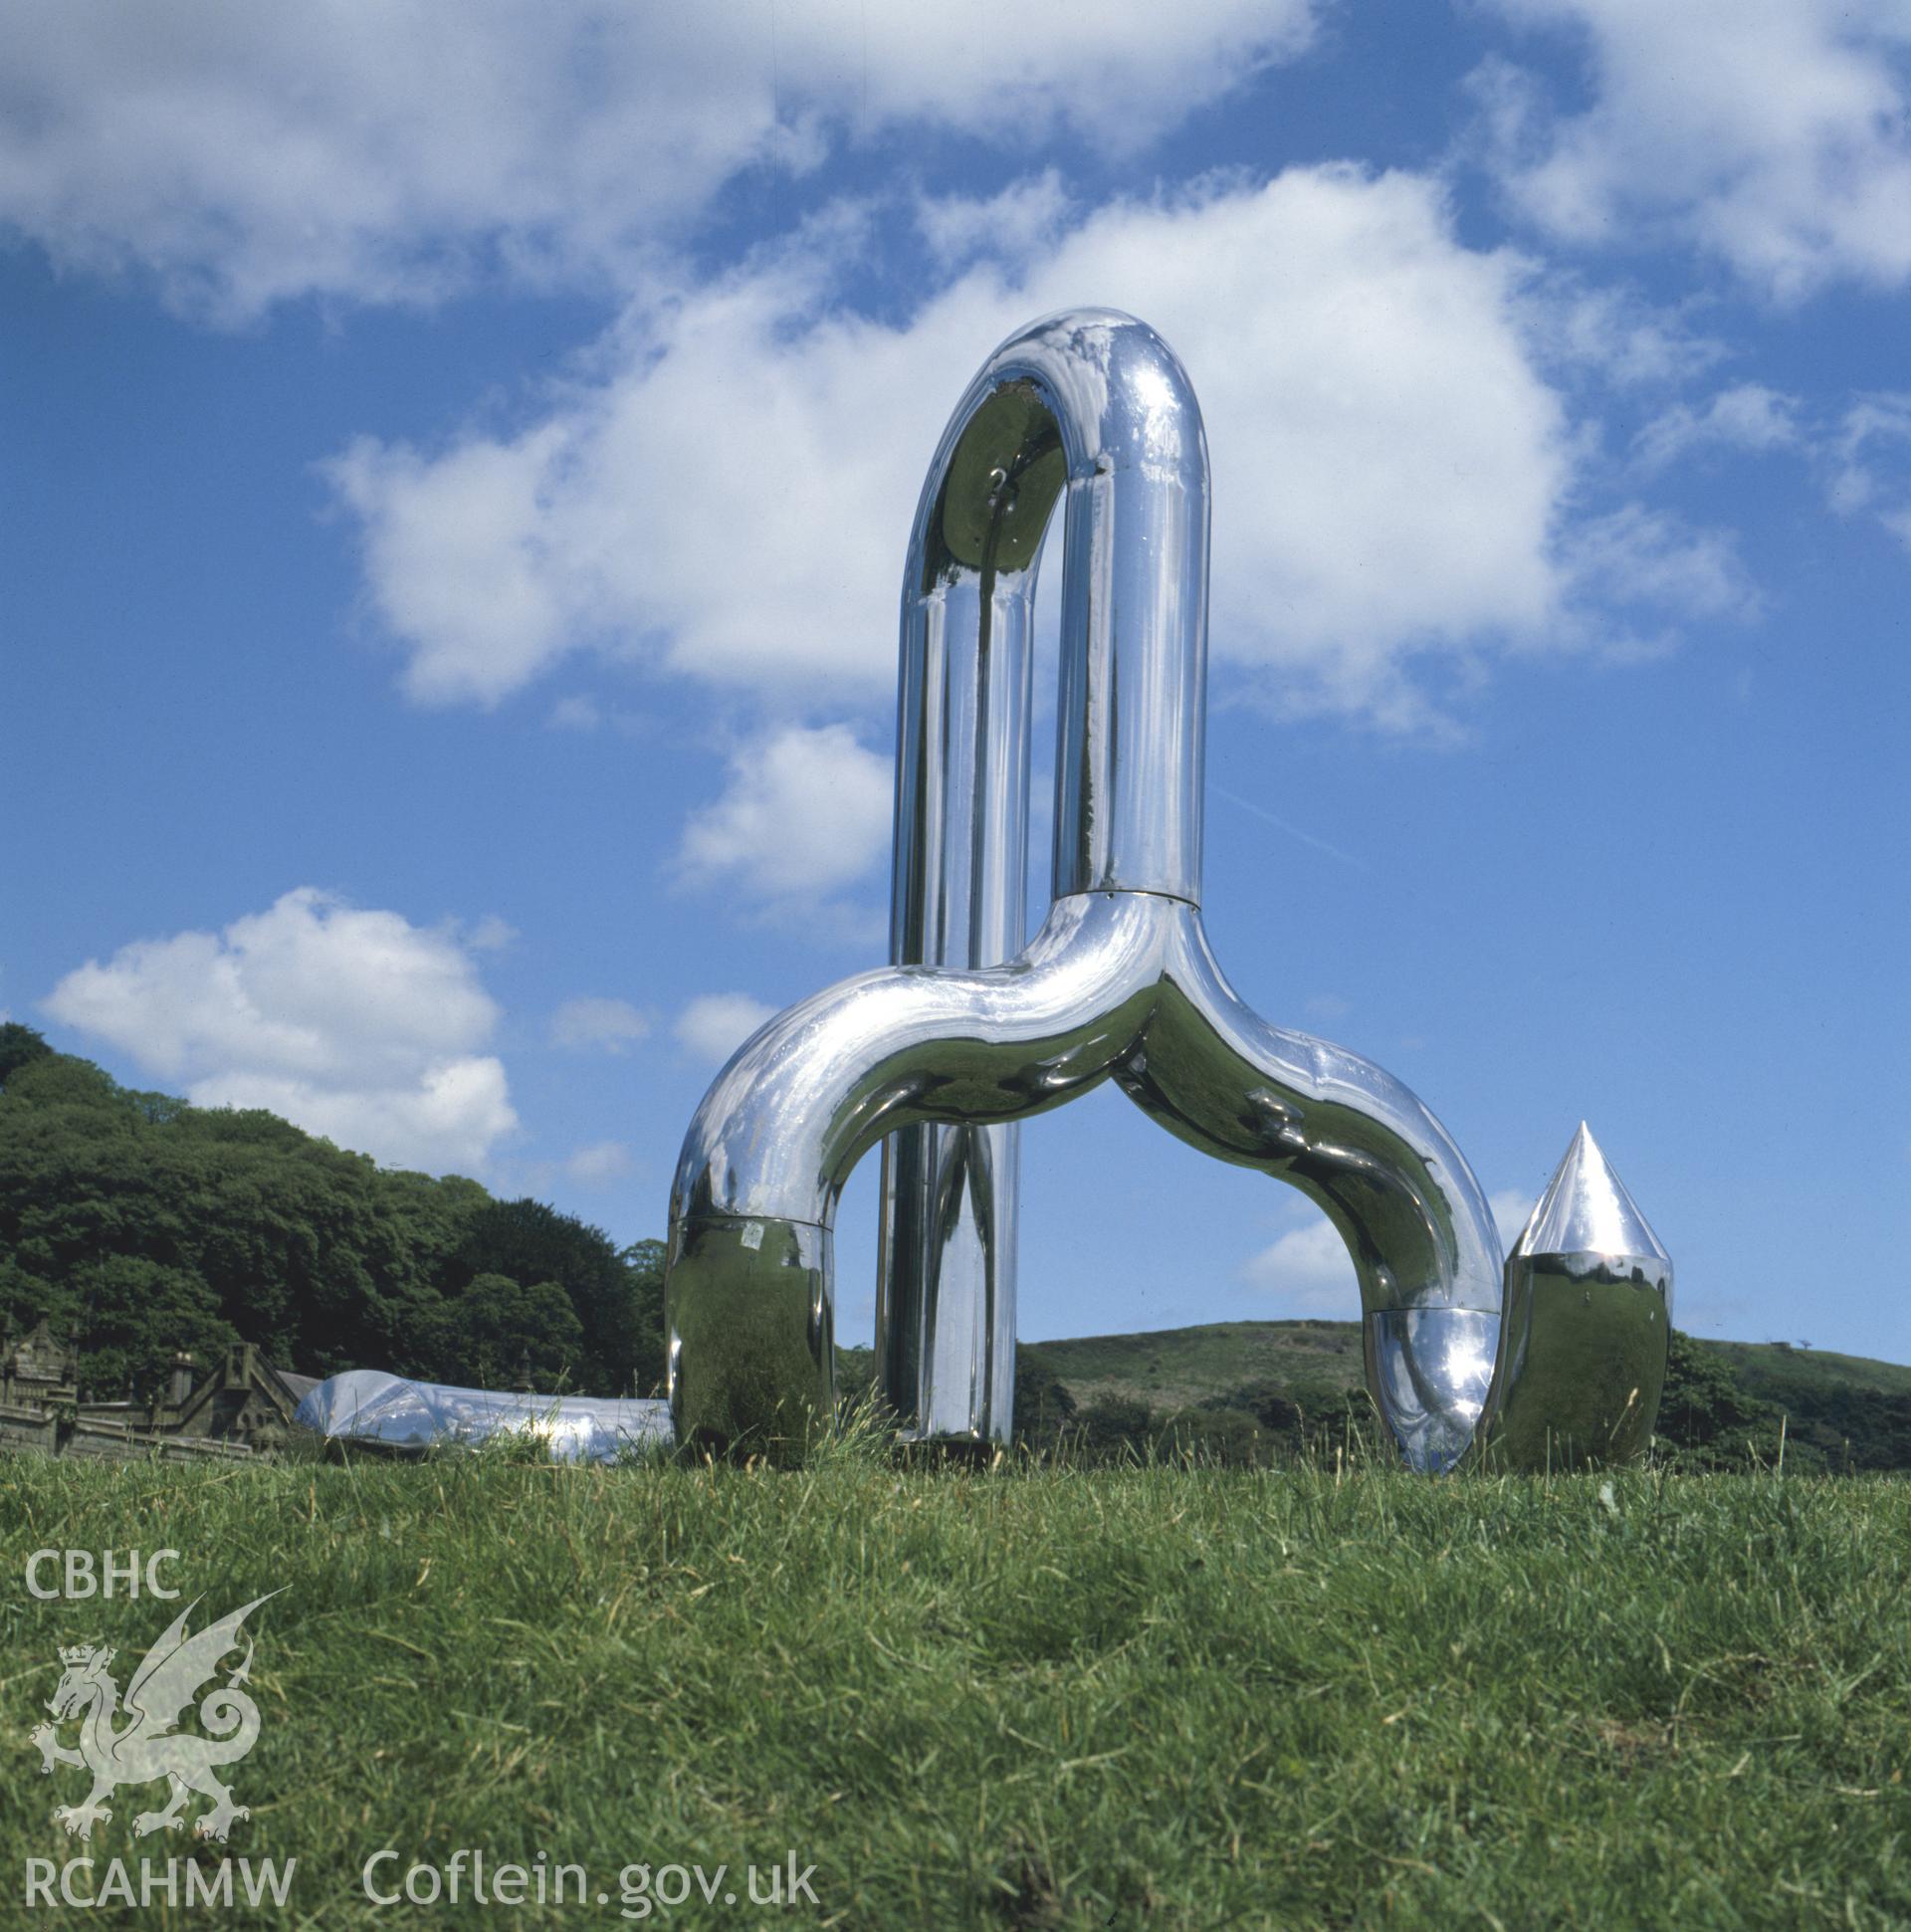 1 colour transparency showing view of steel abstract sculpture enitled: 'Quillion' by Robert Pye, situated at Margam sculpture park; collated by the former Central Office of Information.